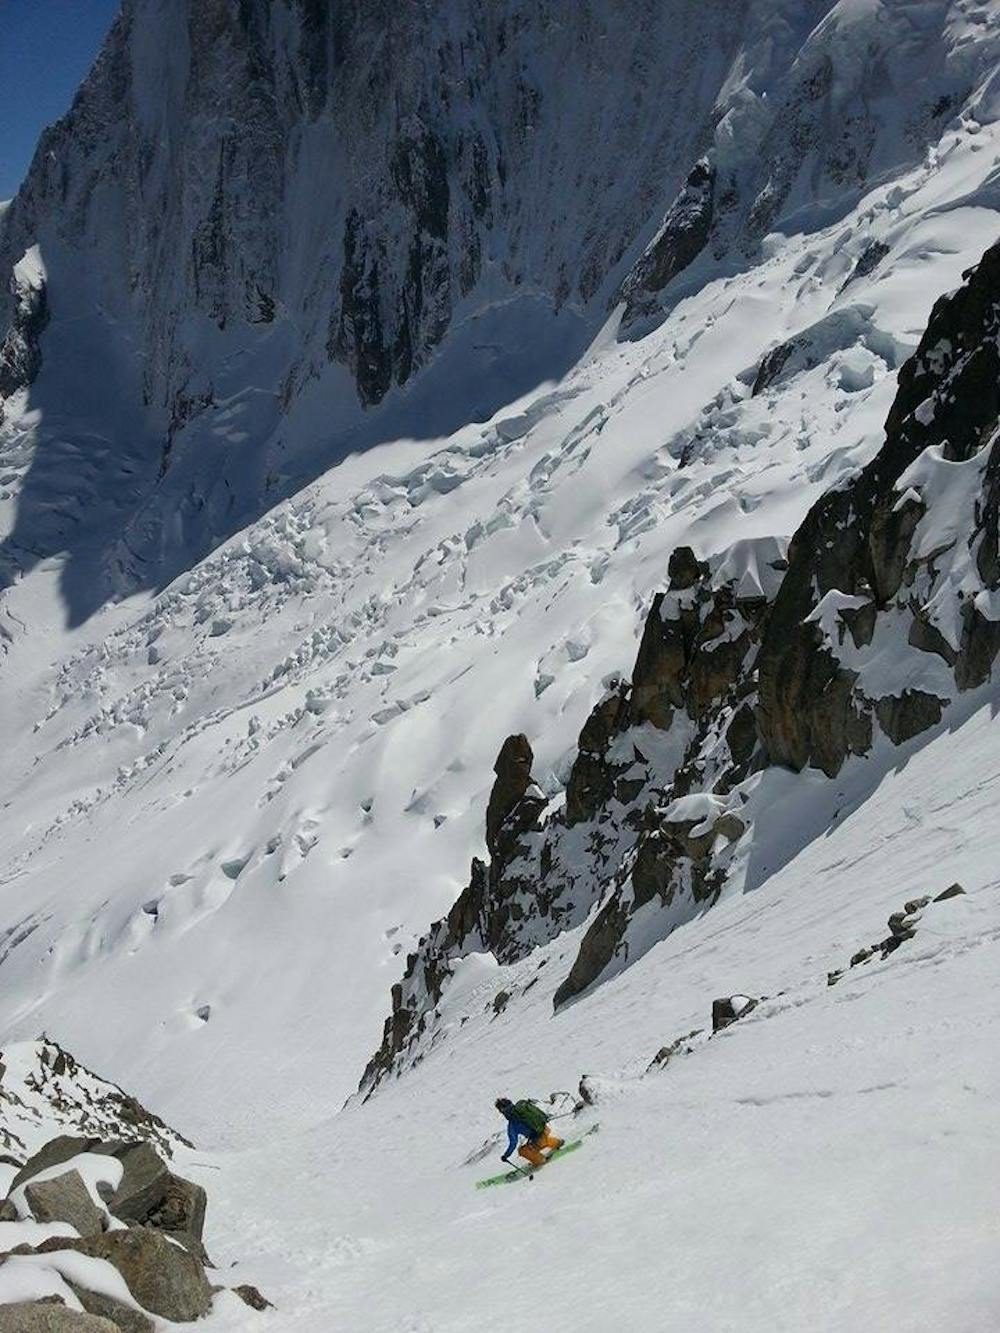 The North Face of the Grandes Jorasses provides a stunning backdrop to the couloir.